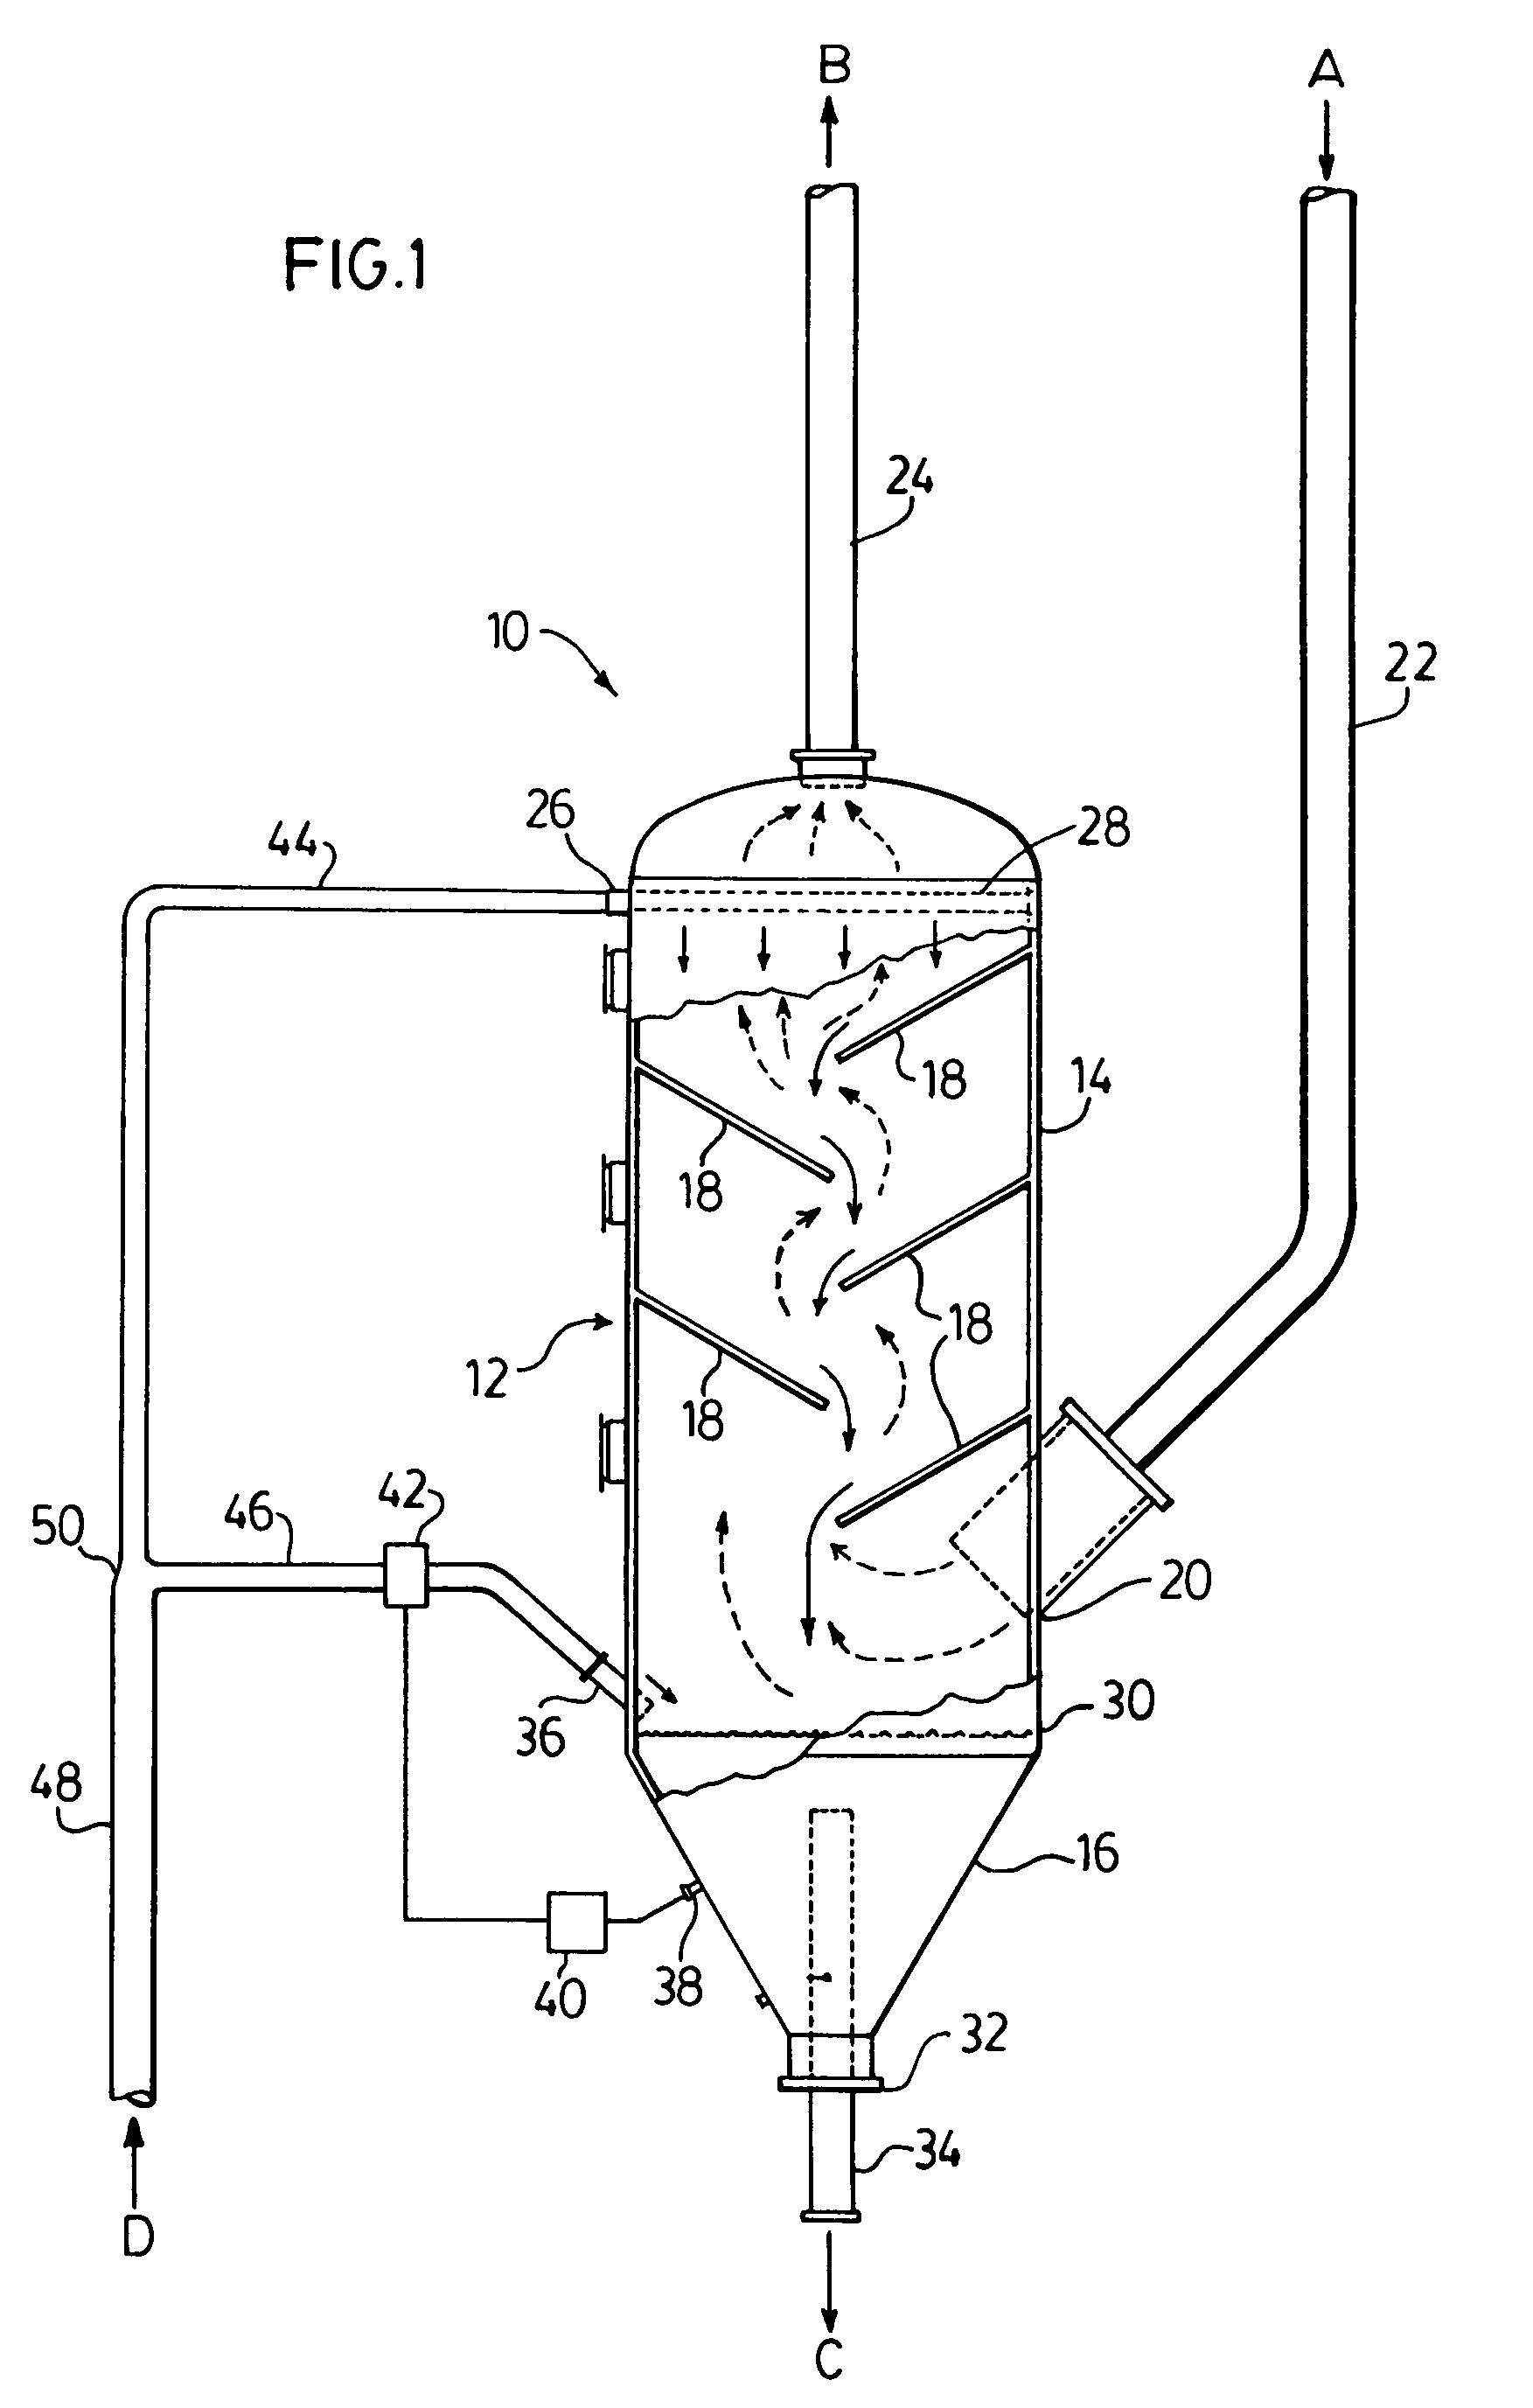 Method and apparatus for heating a slurry to a predetermined temperature